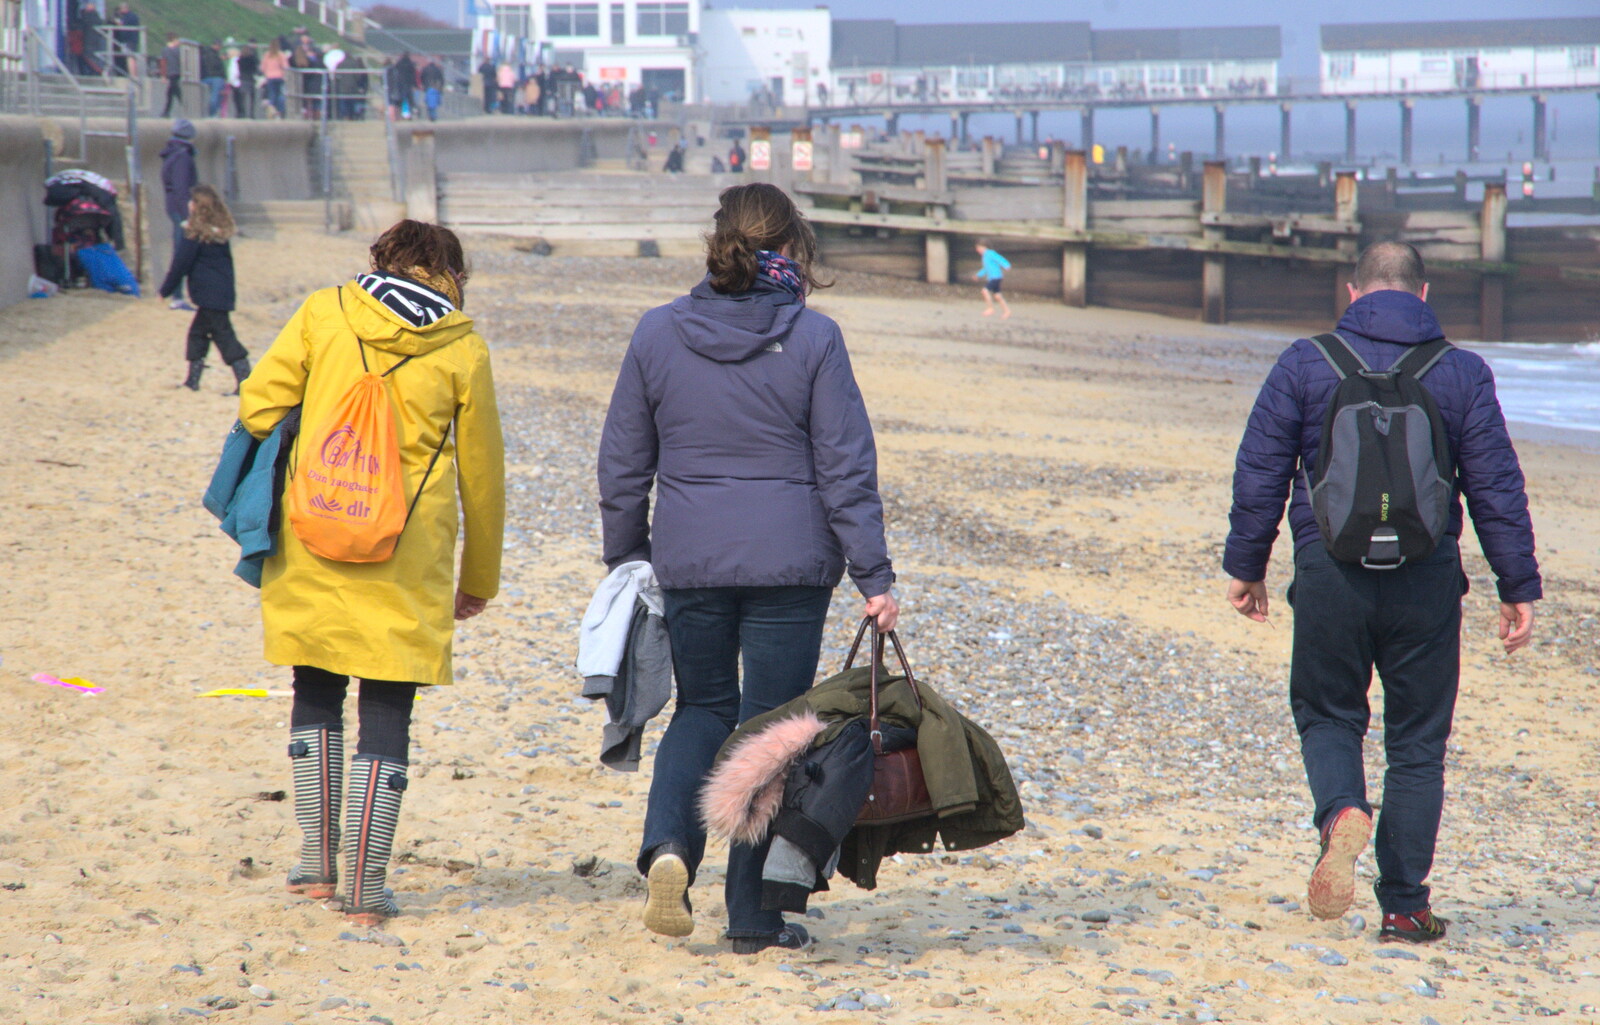 Isobel, Sis and Matt on the beach from On The Beach, Southwold, Suffolk - 7th April 2019